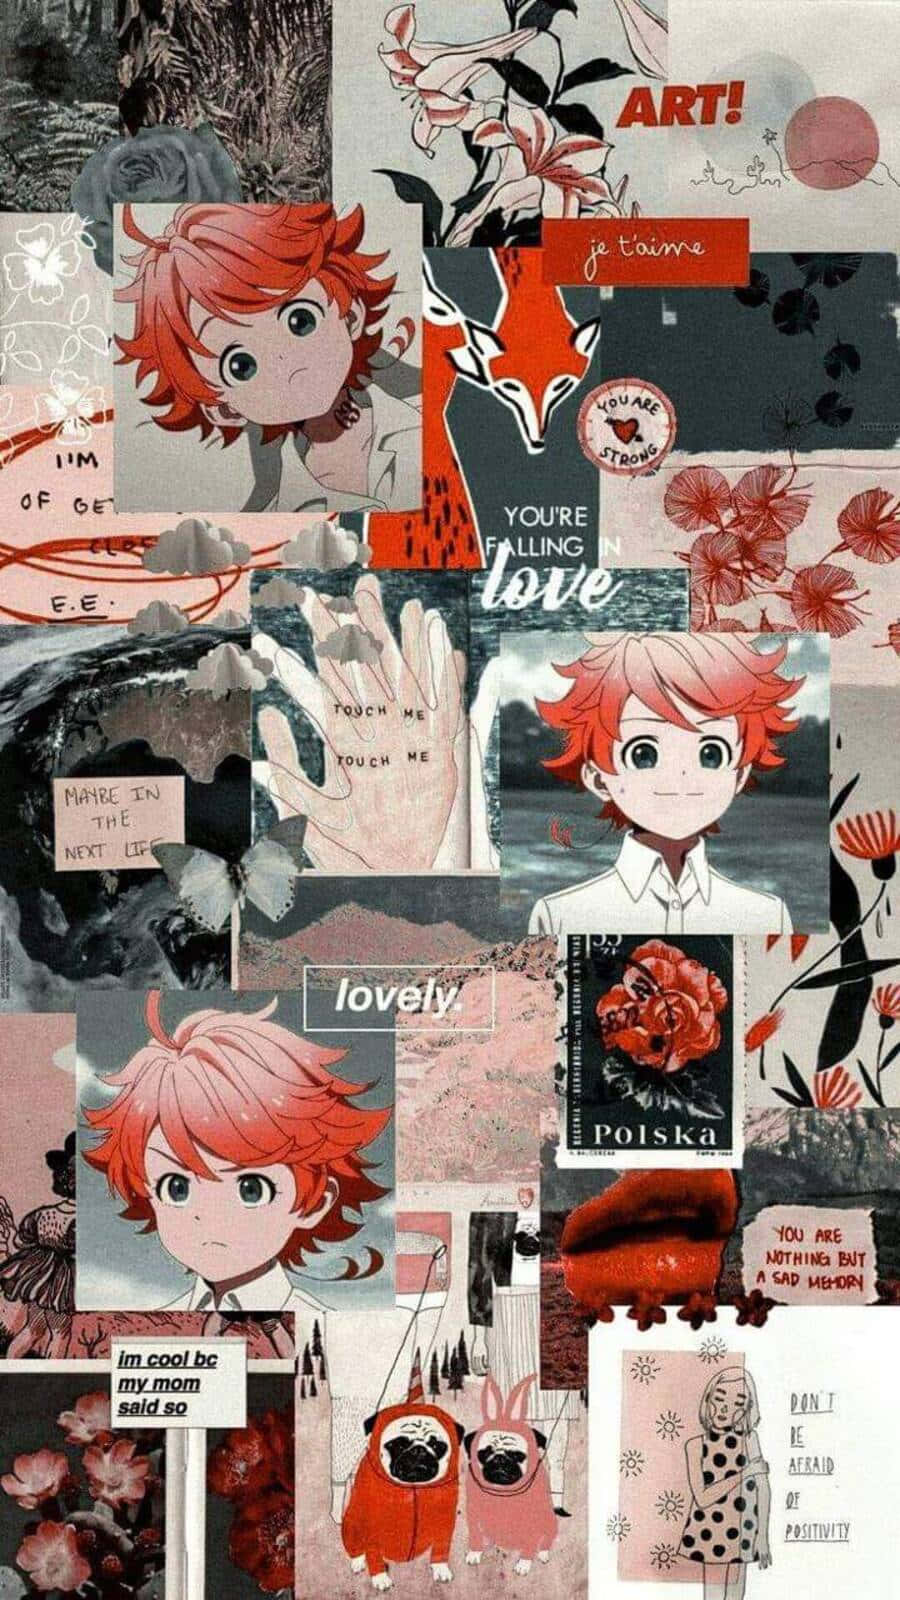 Emma from The Promised Neverland contemplating a plan for escape. Wallpaper